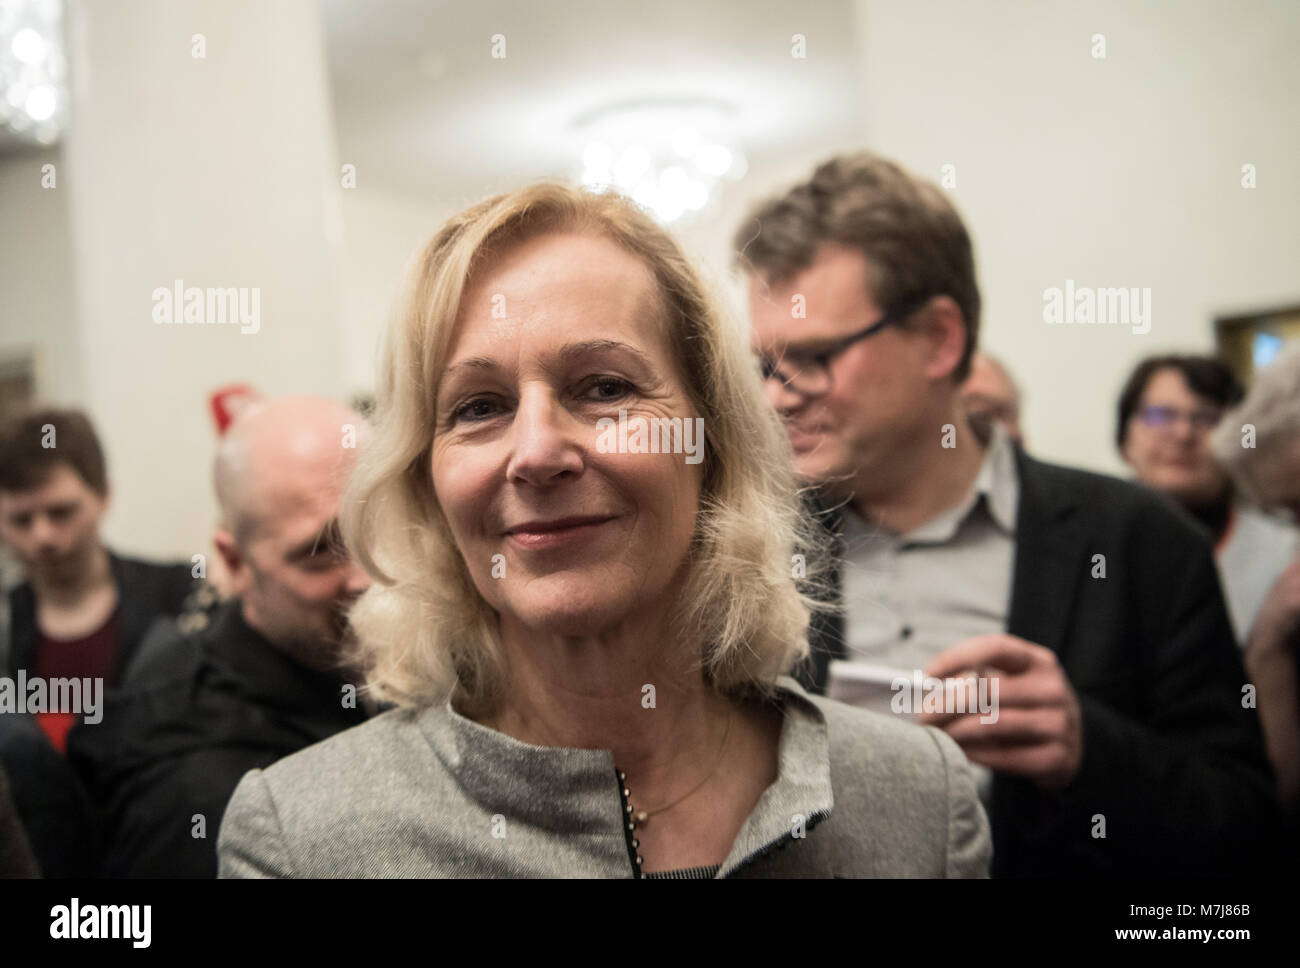 11 March 2018, Germany, Frankfurt am Main: The challenger of the Christian Democratic Union (CDU) Bernadette Weyland stands in the Roemer (lit. Roman). The incumbent of the Social Democratic Party (SPD) clearly prevailed against the challenger of the Christian Democratic Union (CDU) after the preliminary results in the run-off. Photo: Andreas Arnold/dpa Stock Photo